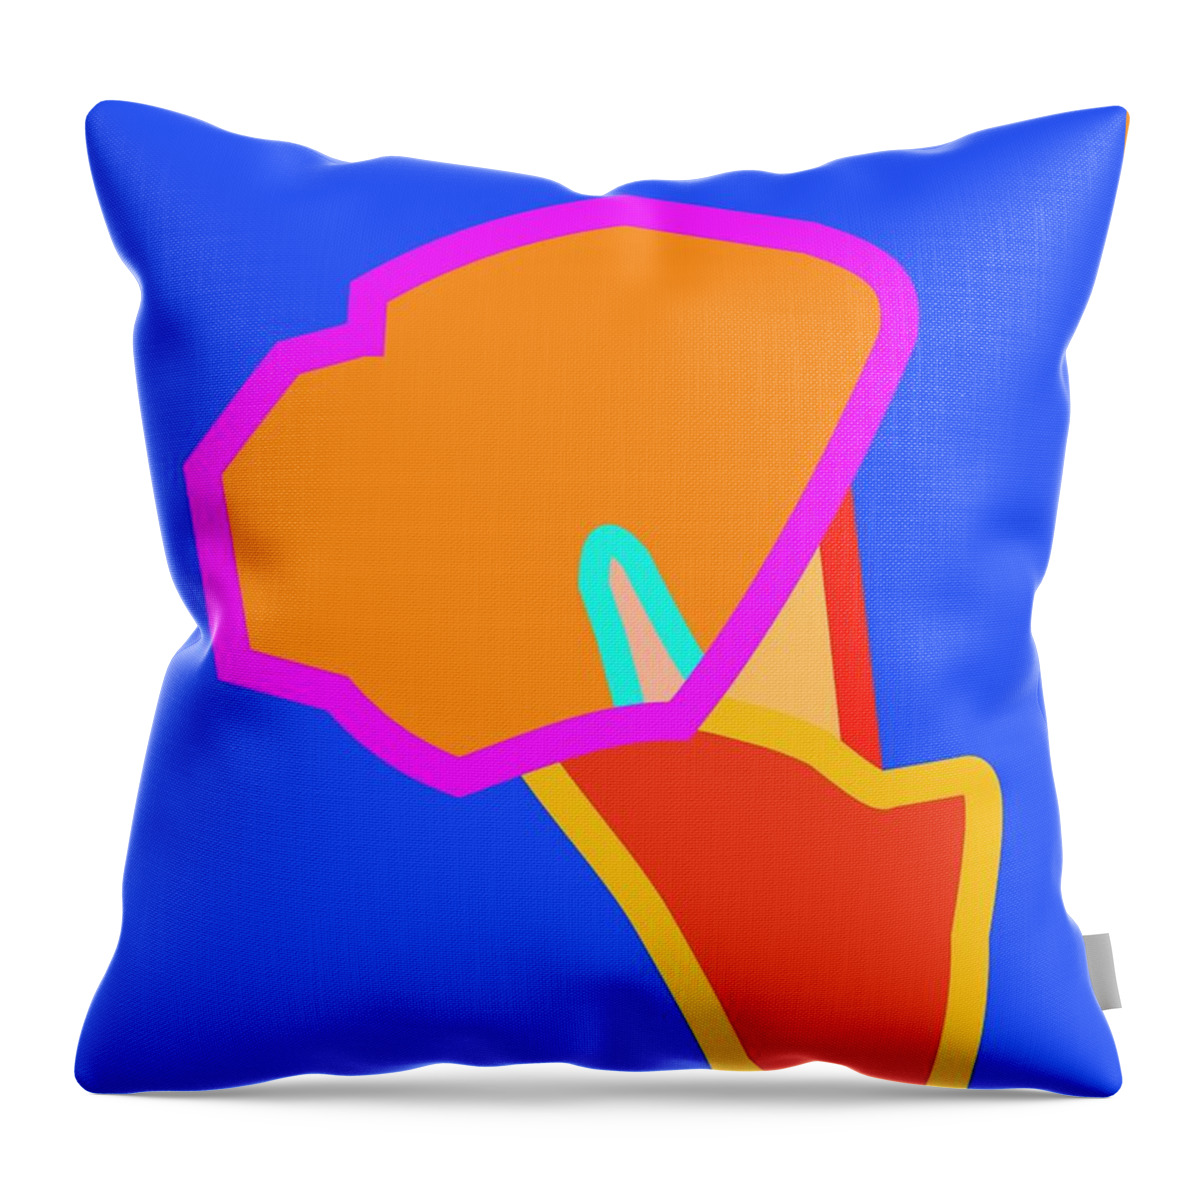 Lily Throw Pillow featuring the digital art Lily by Fatline Graphic Art